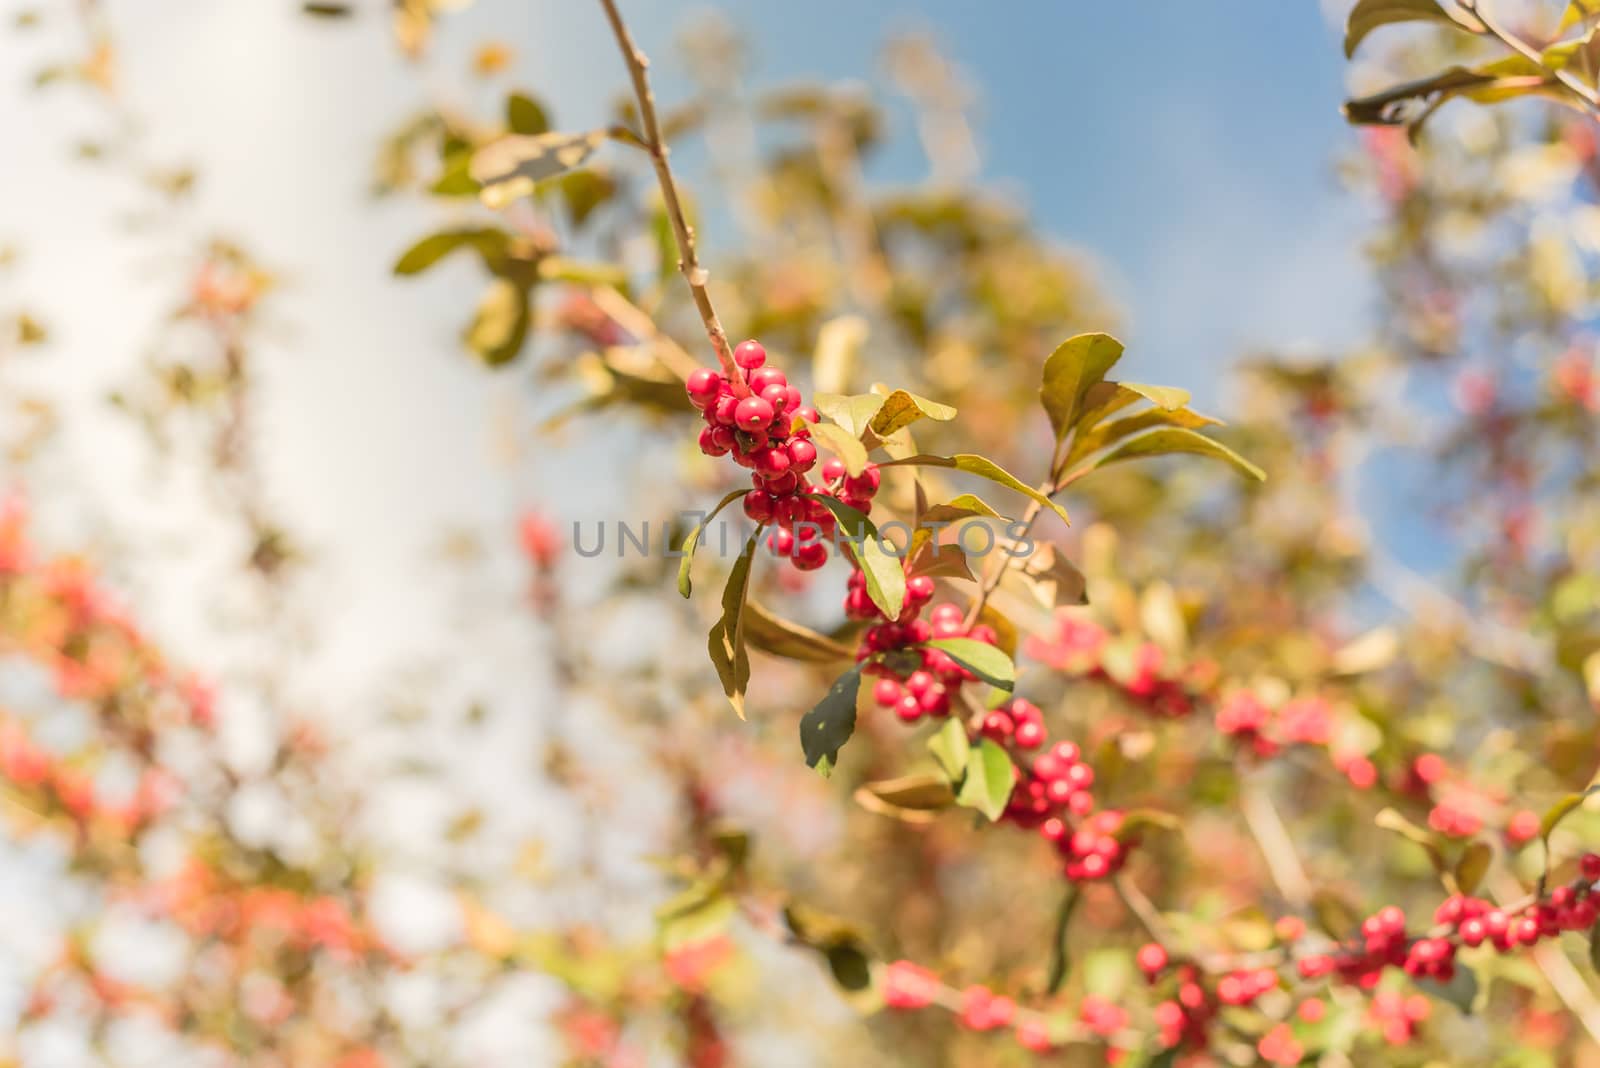 Beautiful Texas Winterberry Ilex Decidua red fruits on tree branches on sunny fall day by trongnguyen